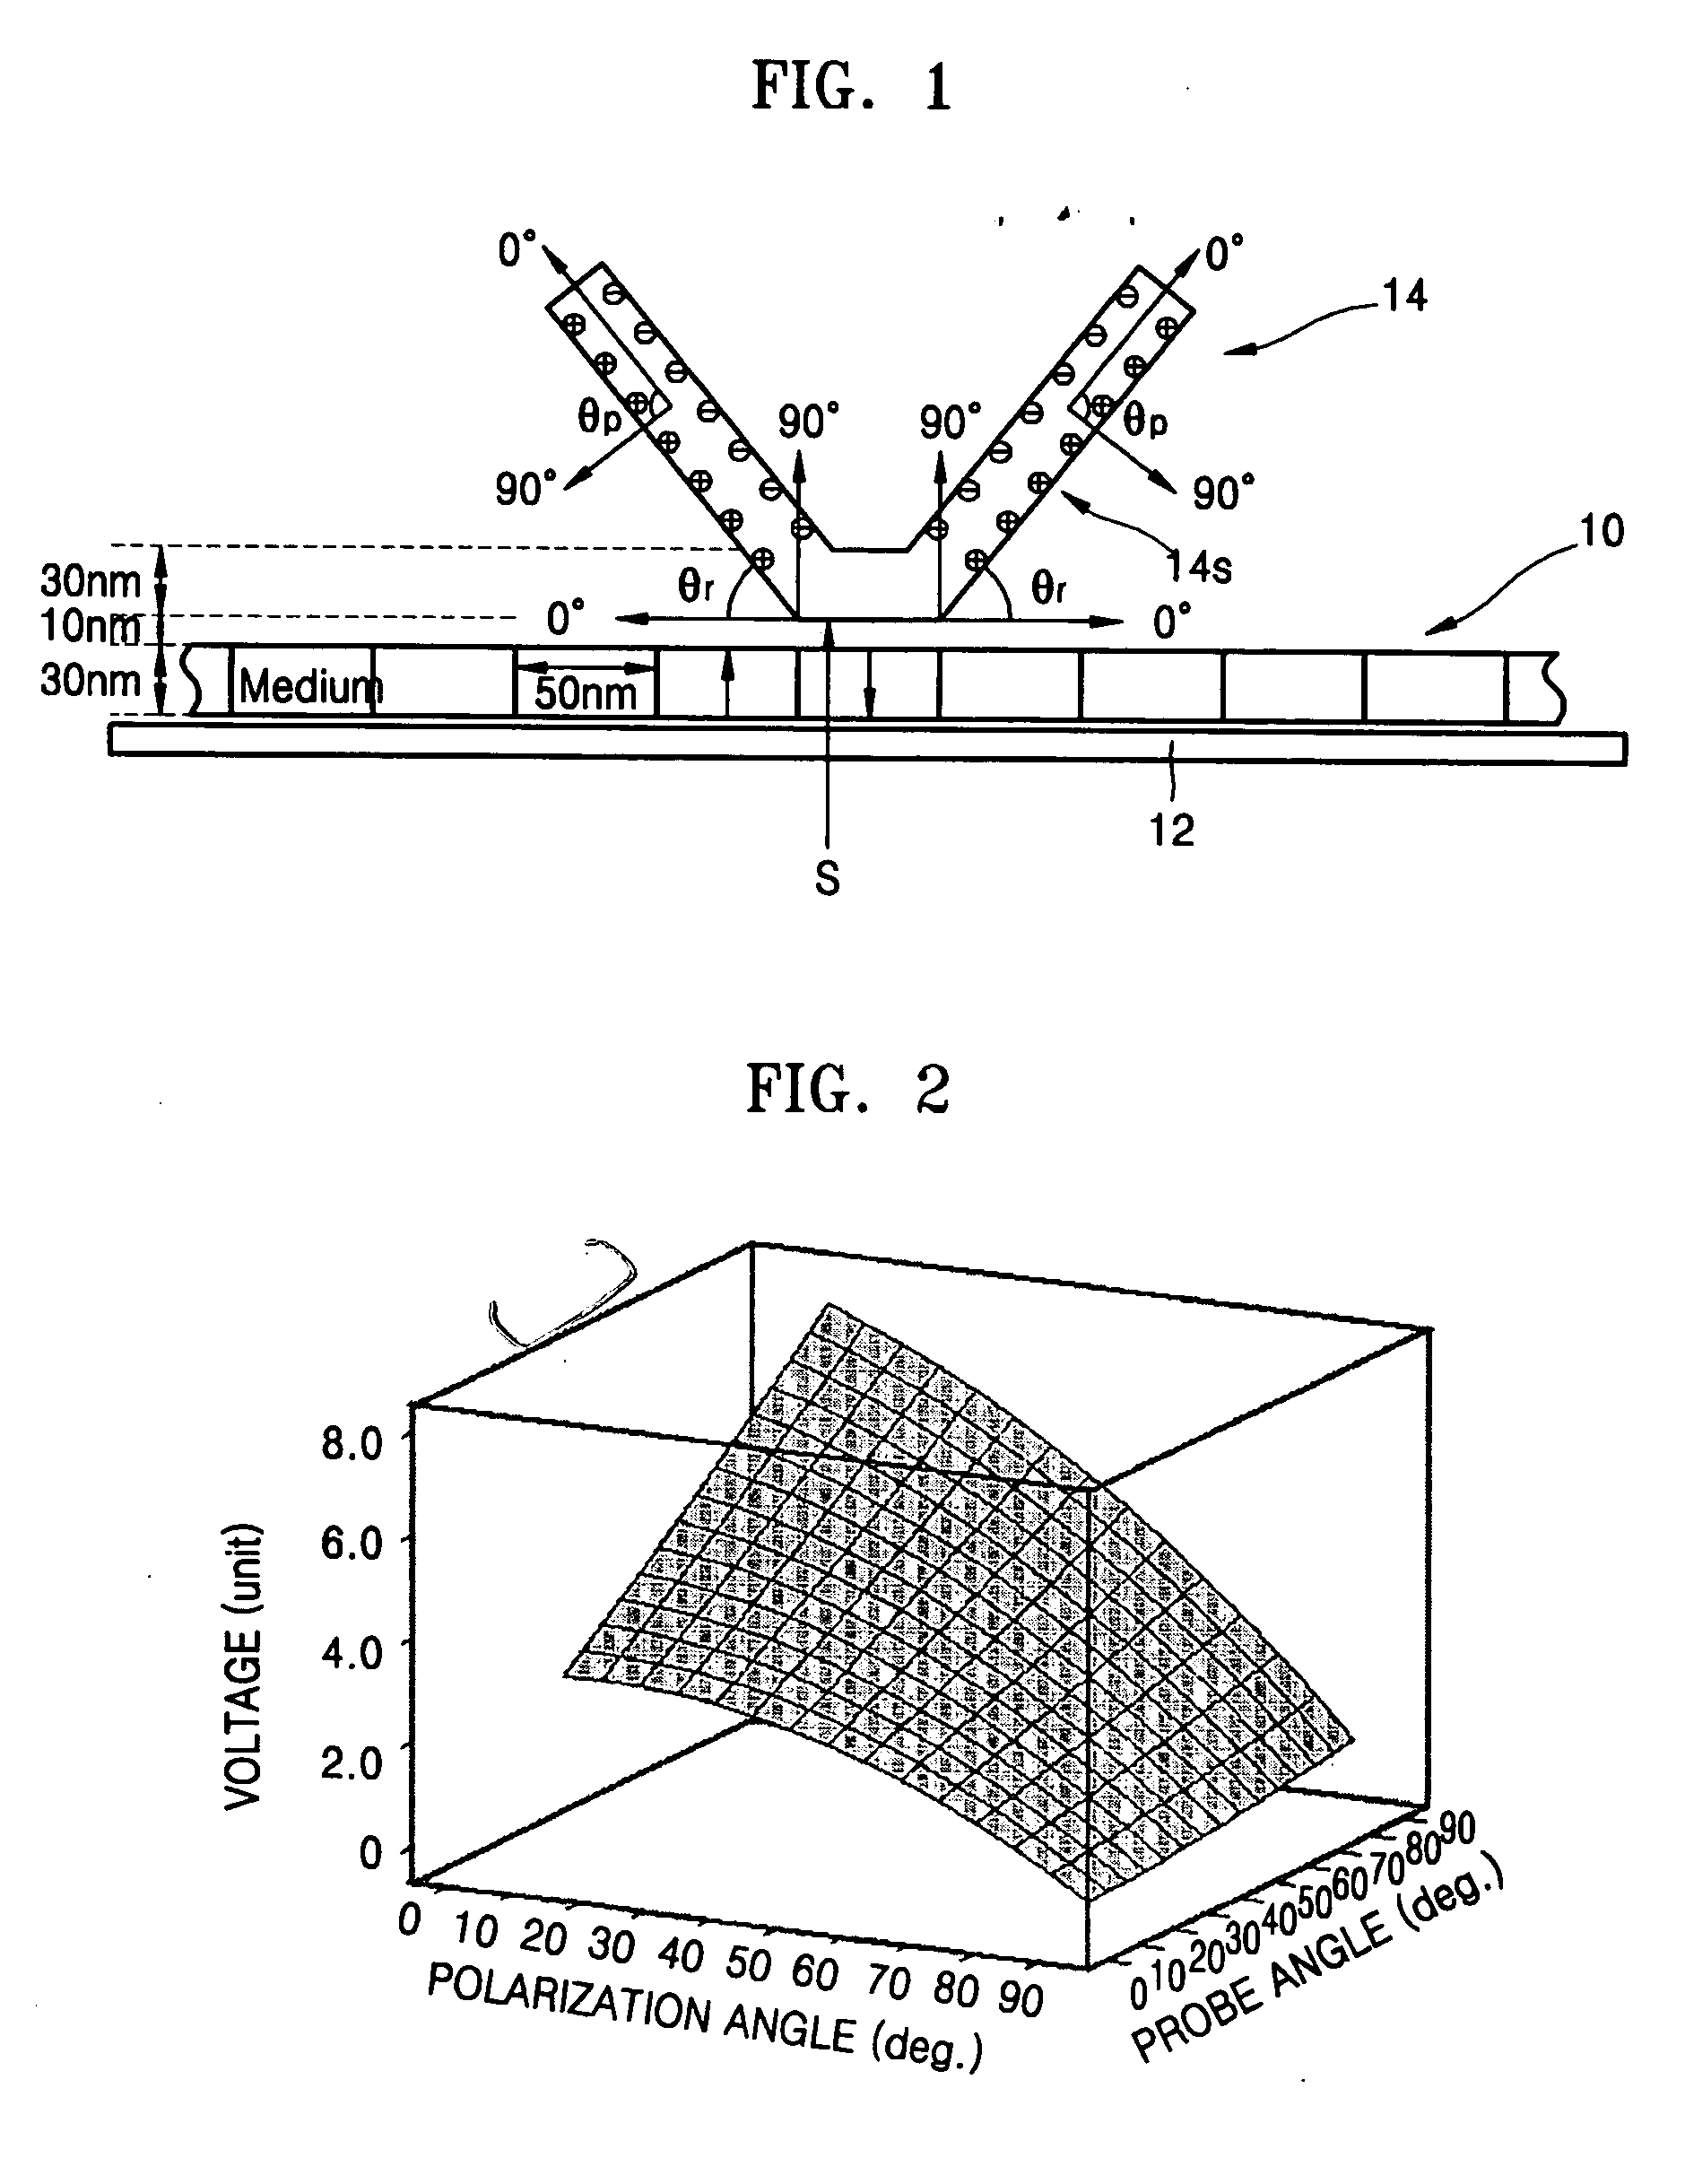 Electrical read head having high sensitivity and resolution power and method of operating the same